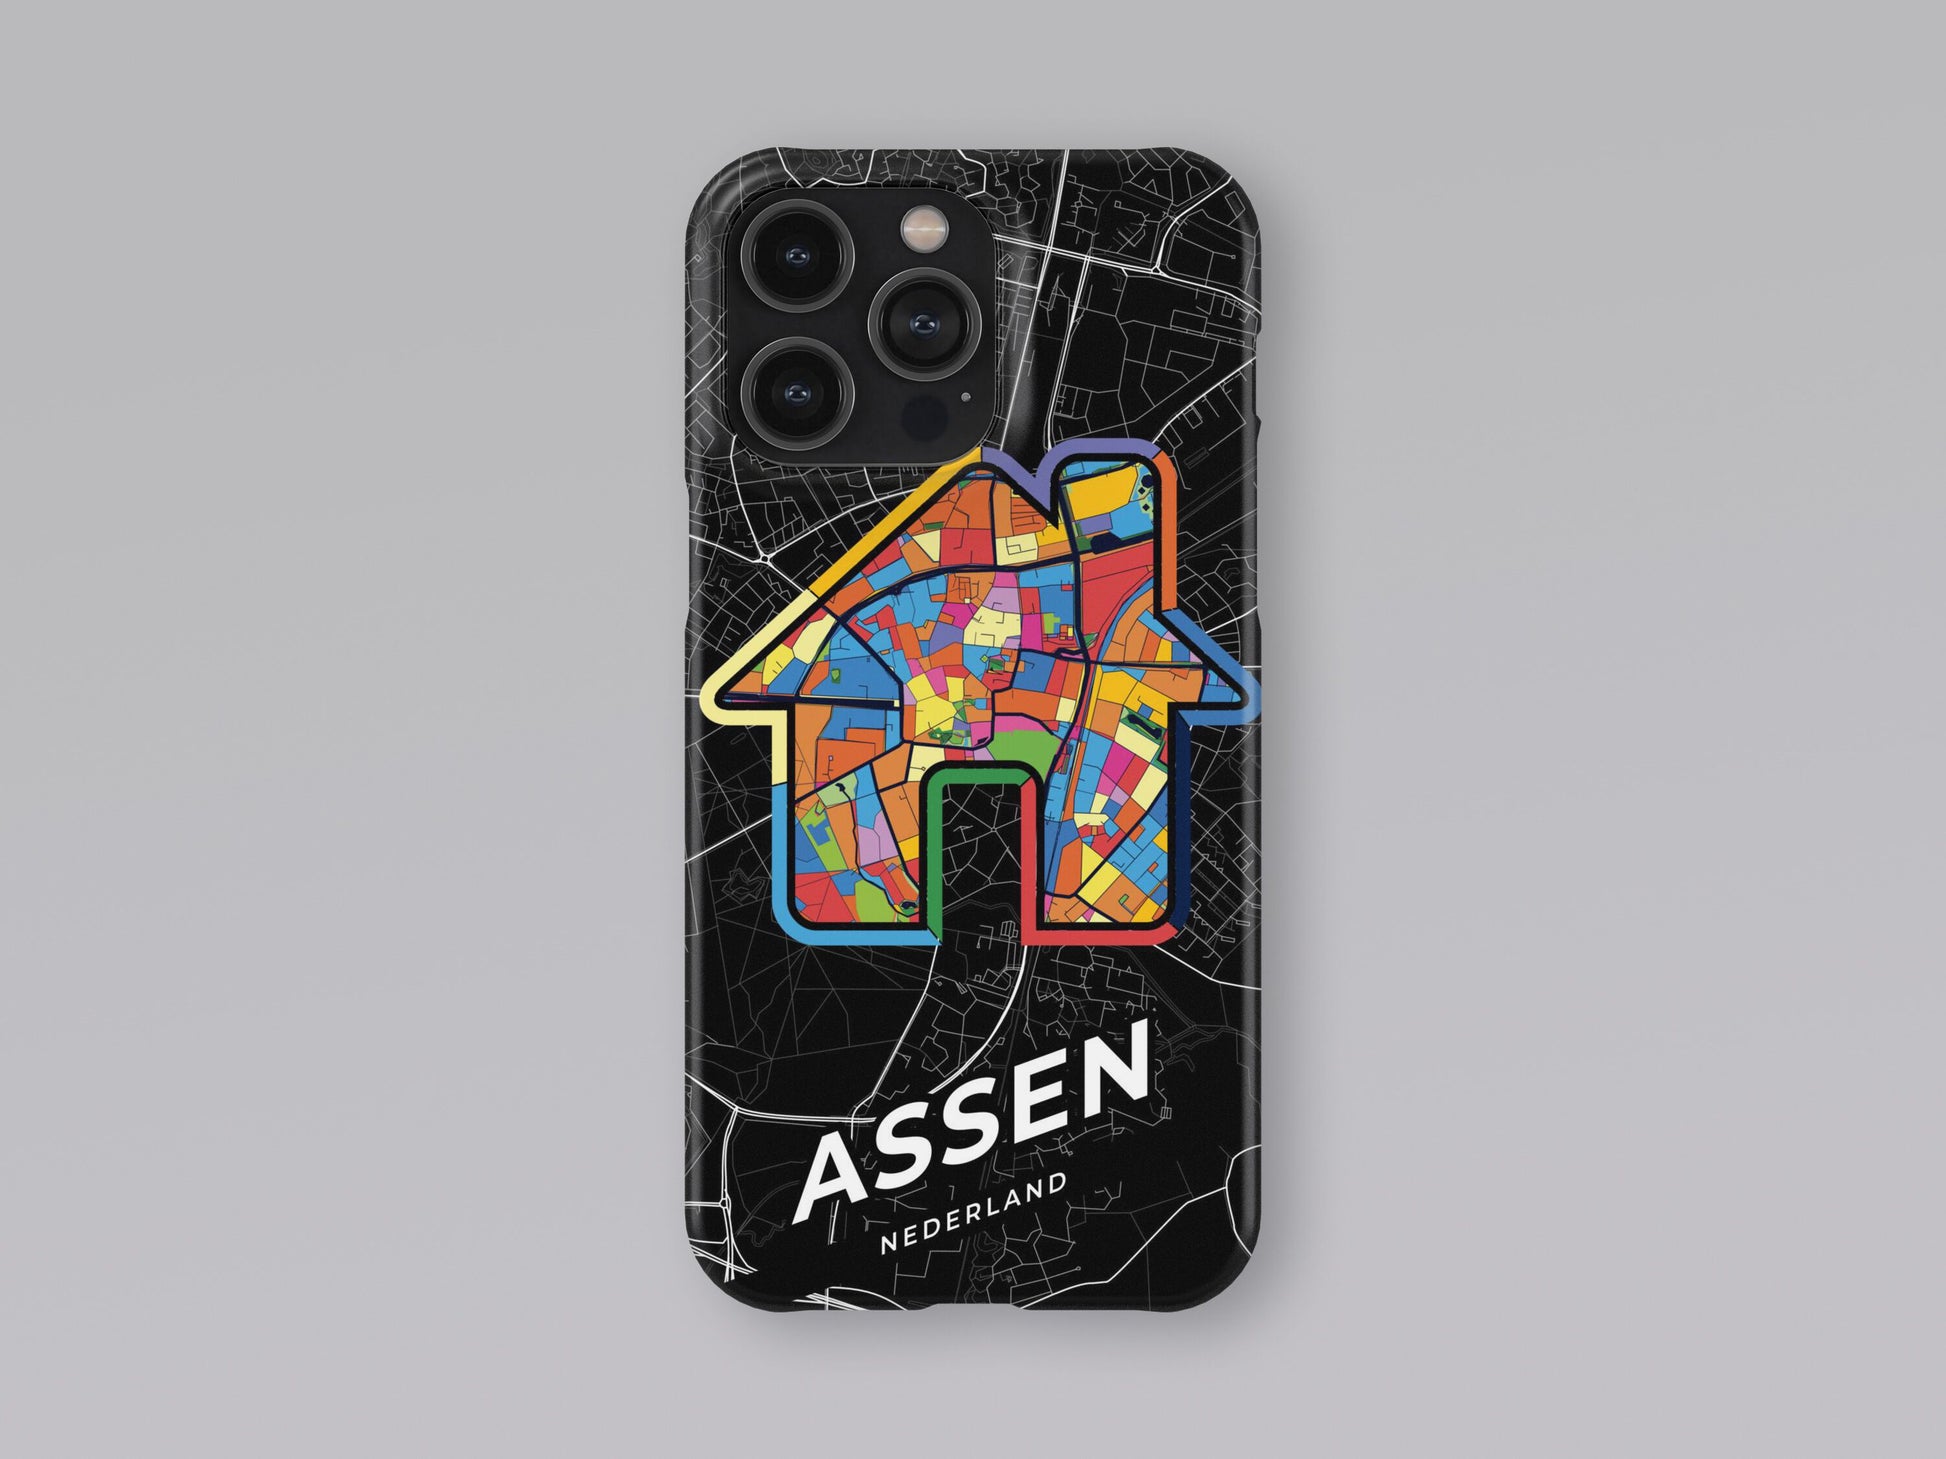 Assen Netherlands slim phone case with colorful icon. Birthday, wedding or housewarming gift. Couple match cases. 3